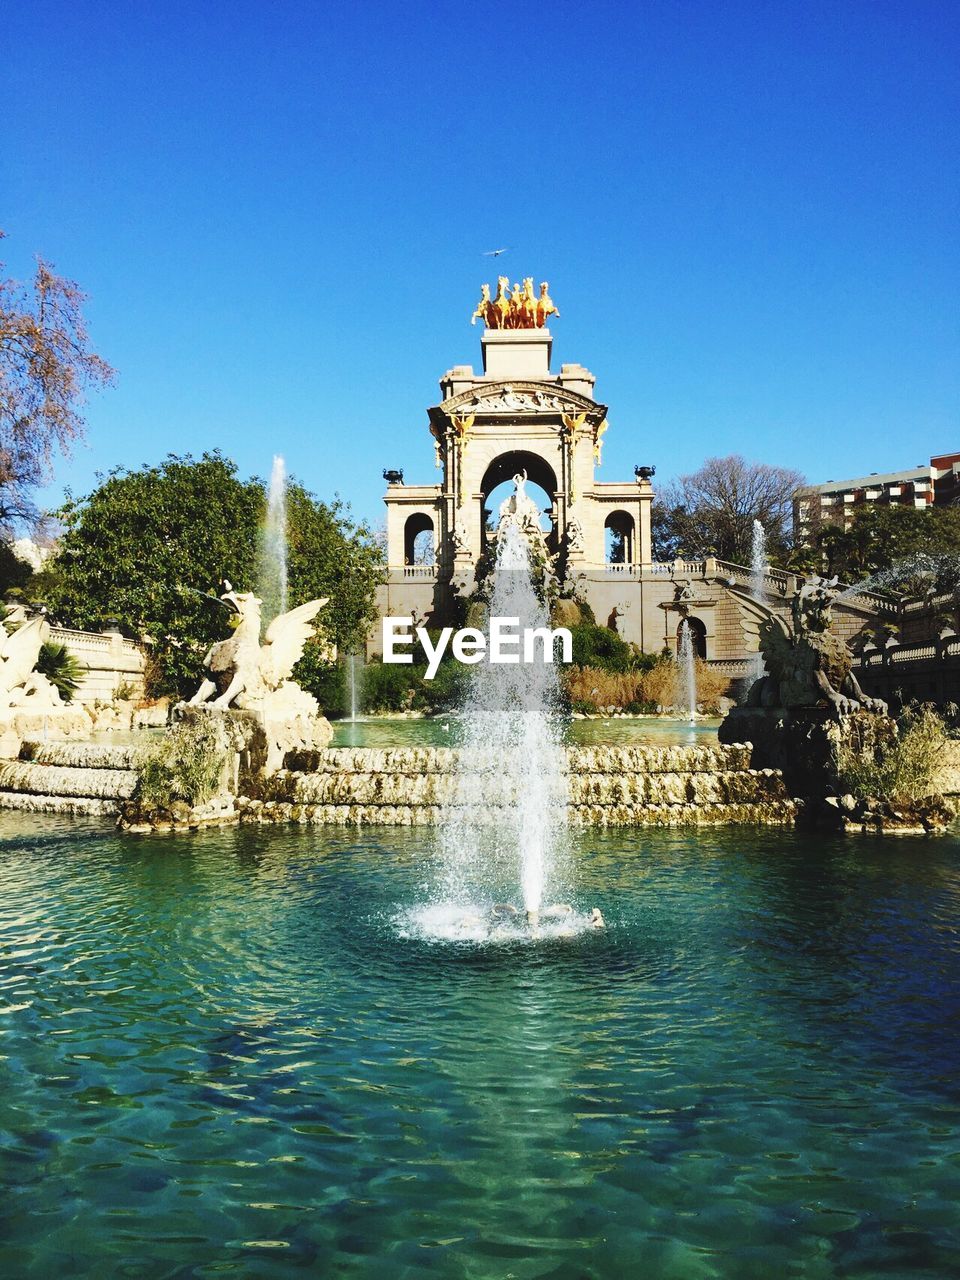 VIEW OF FOUNTAIN AGAINST CLEAR SKY